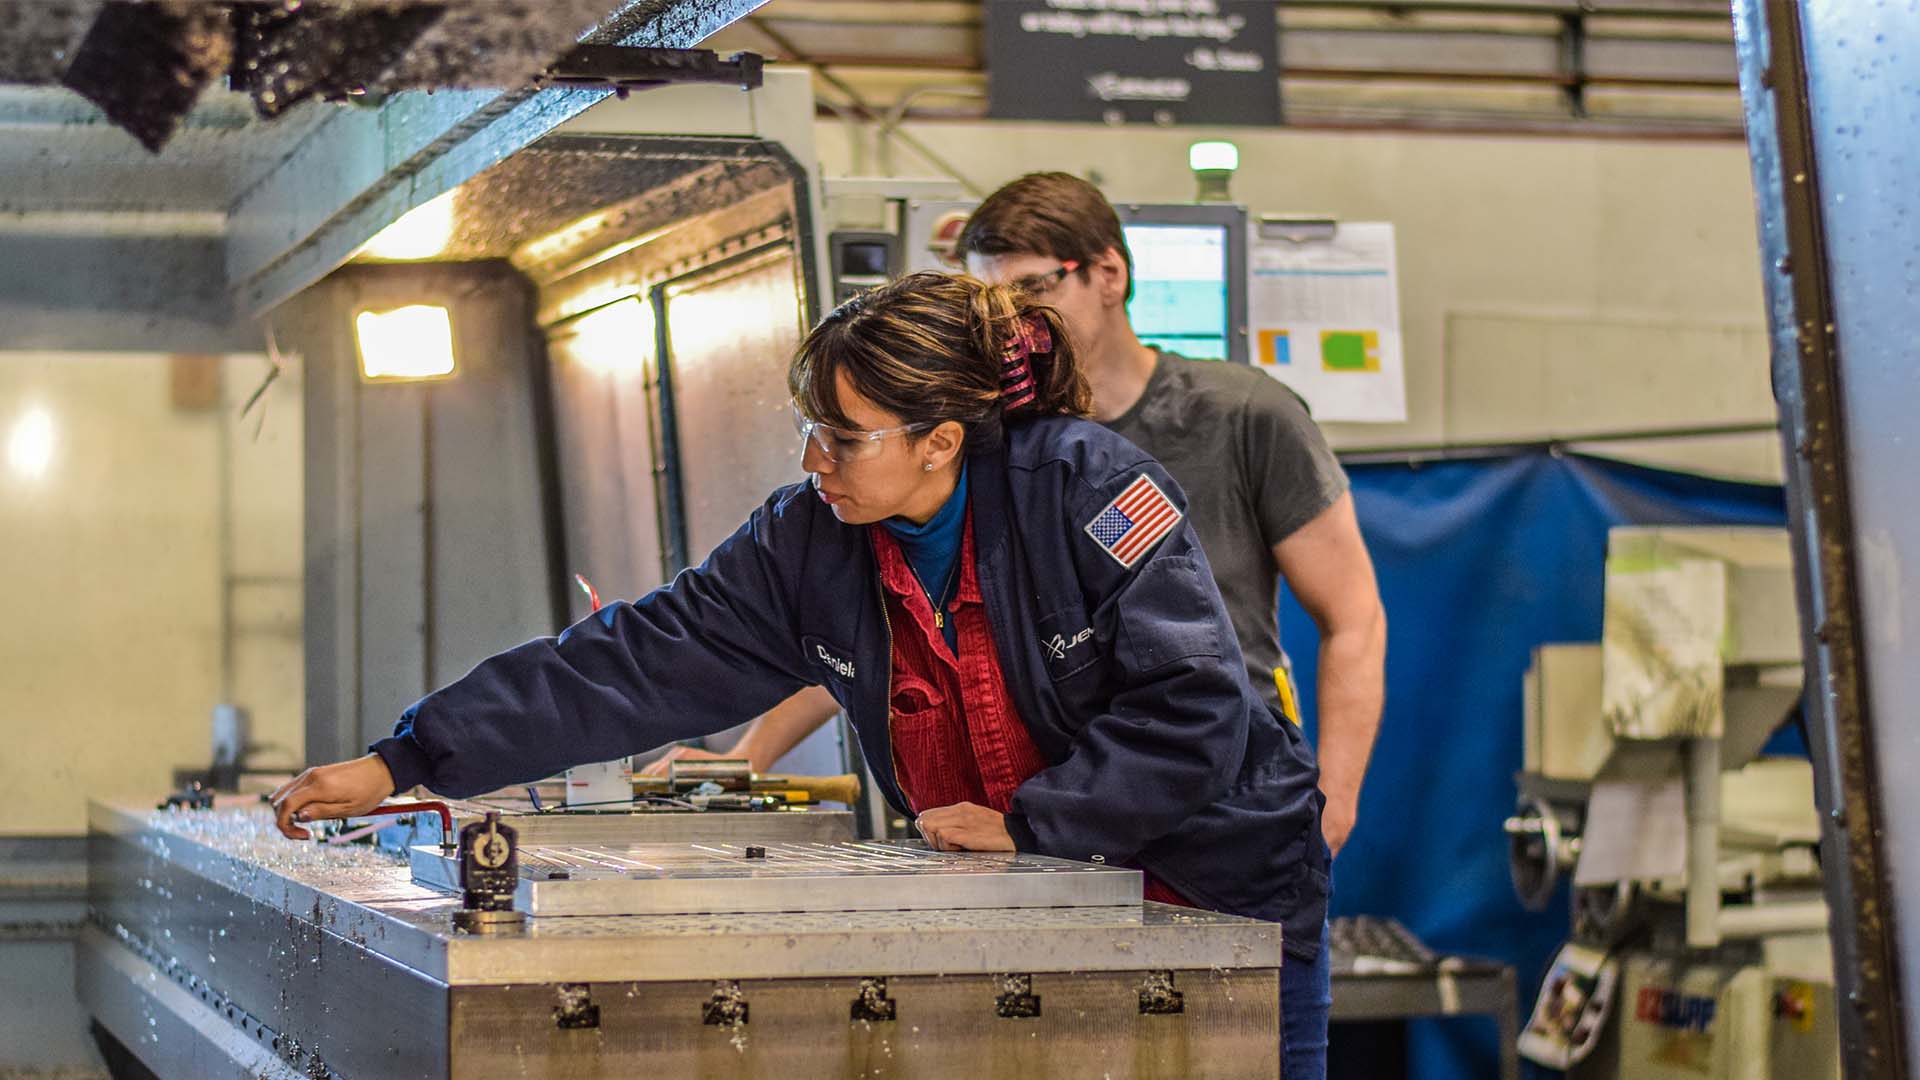 An apprentice learn from her mentor on the shop floor at a machine shop.